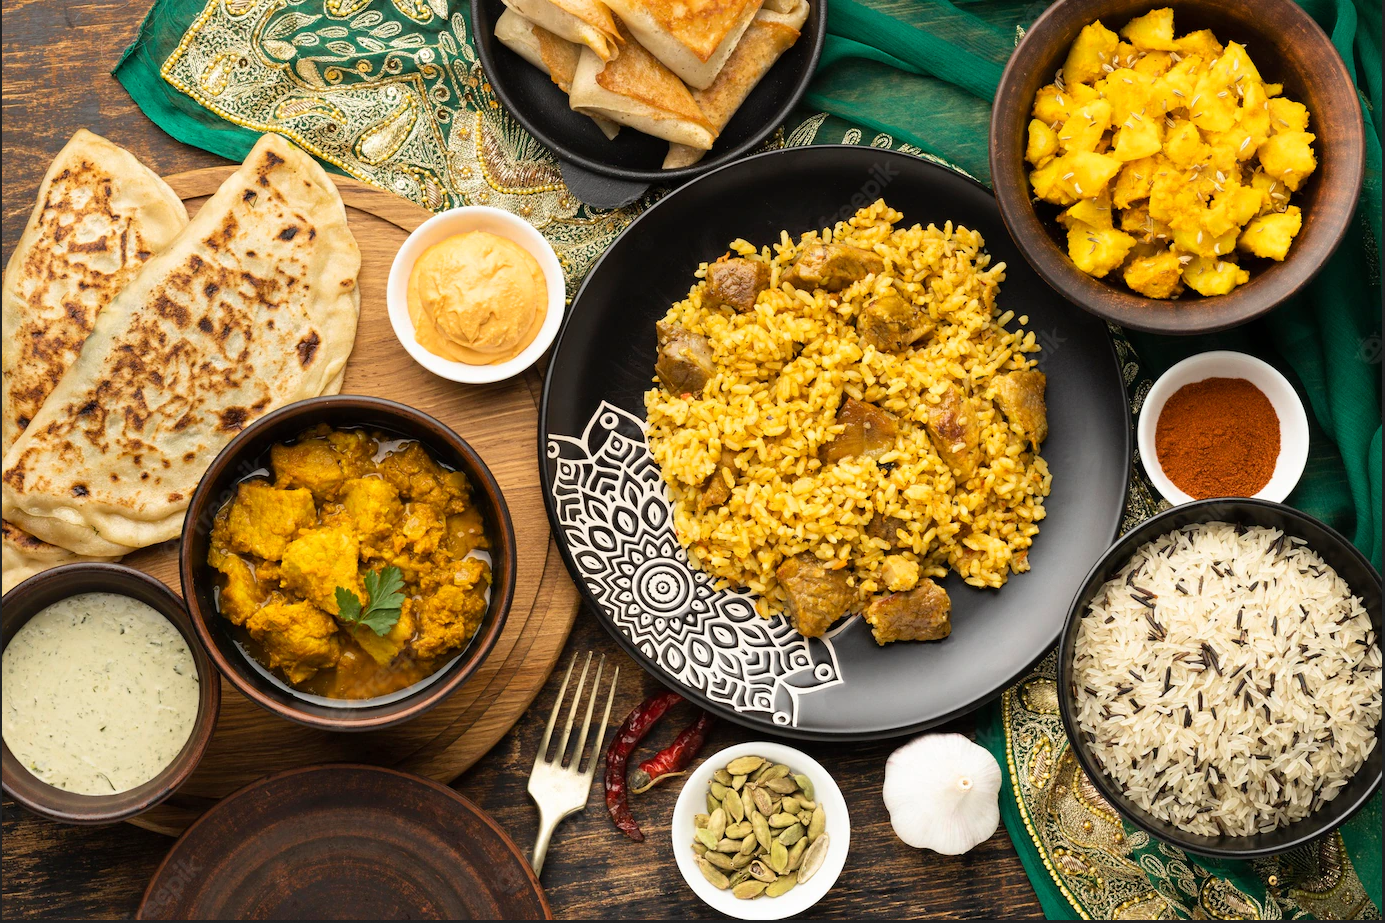 Top Dishes to Try If You Are New to Indian Food 